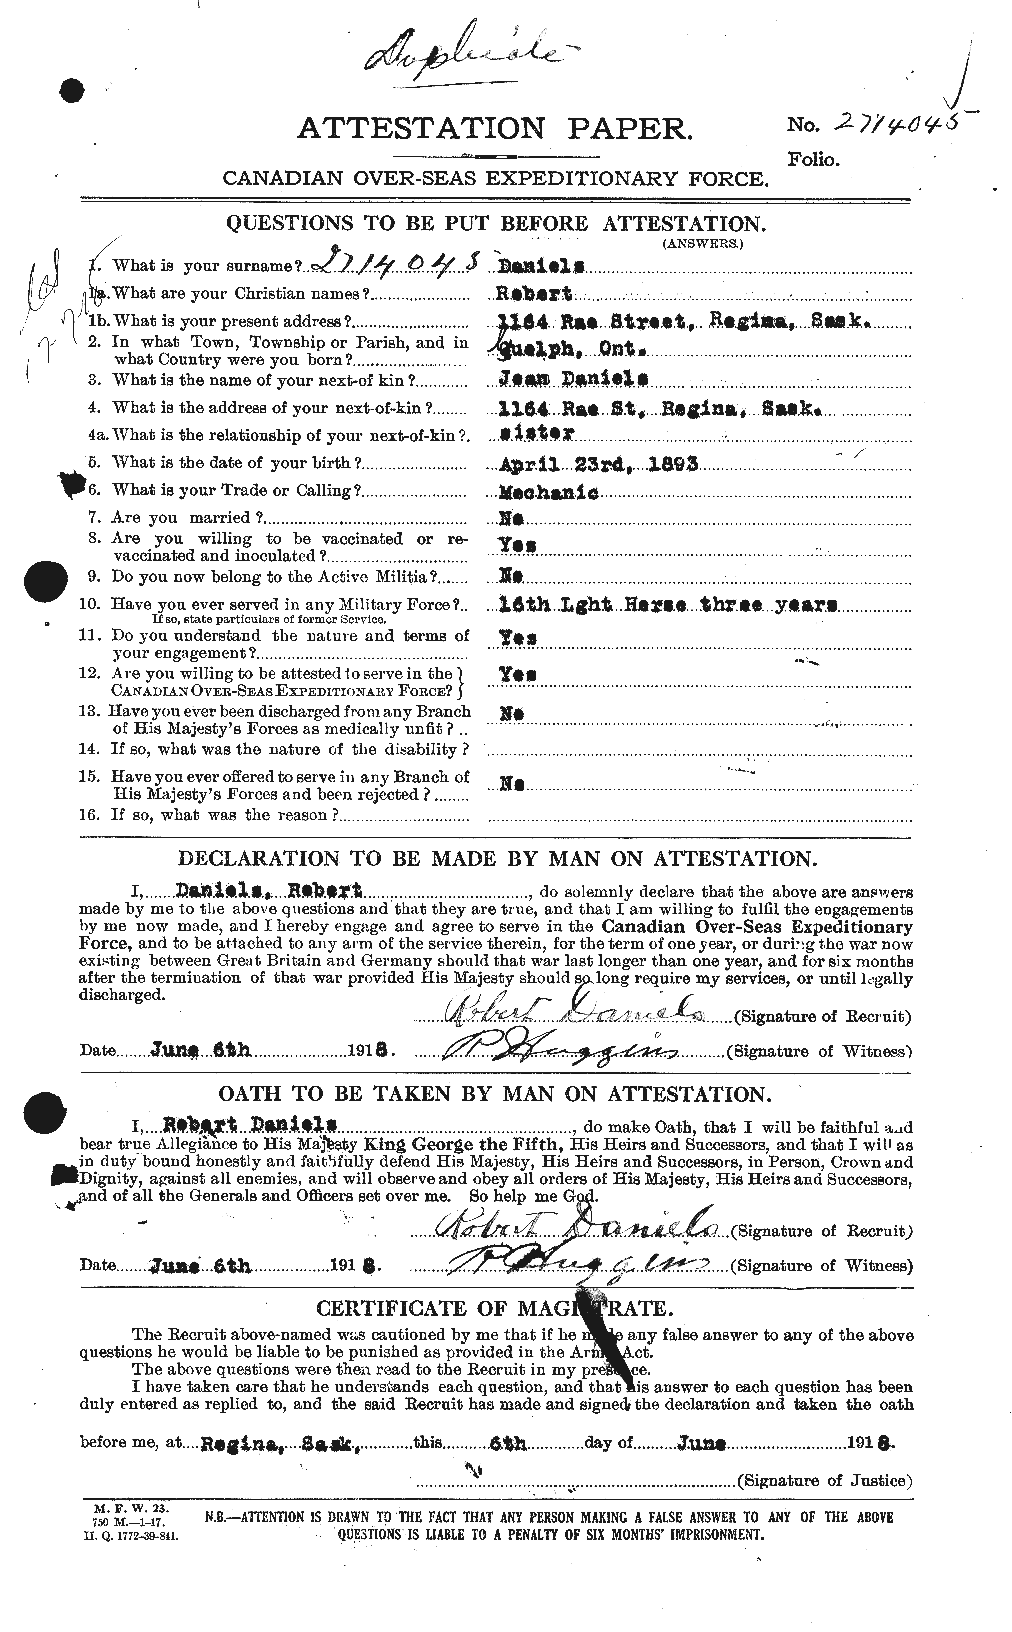 Personnel Records of the First World War - CEF 279669a